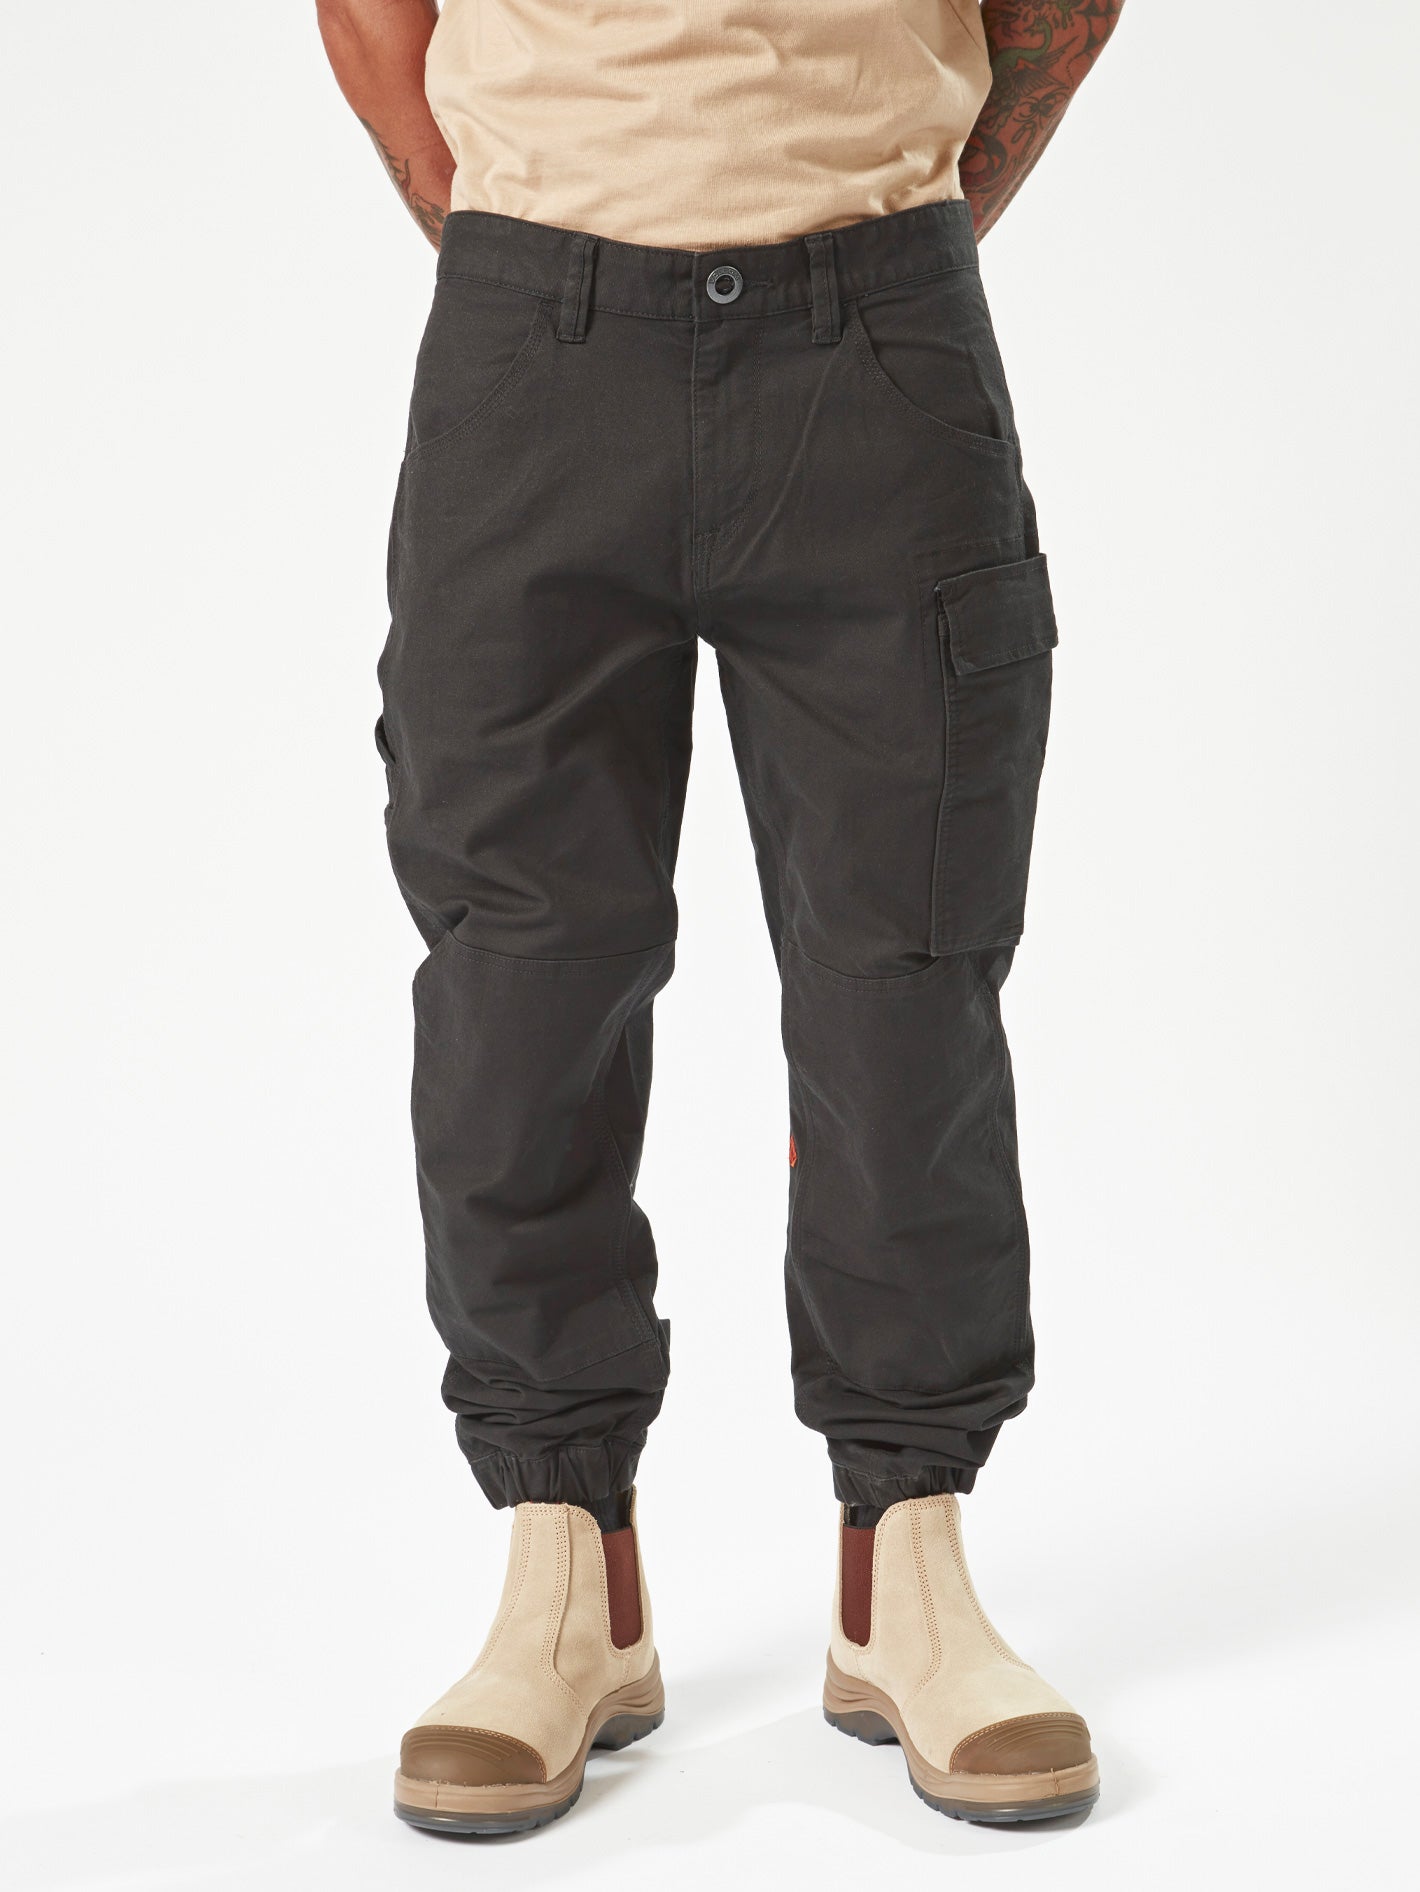 Black Cuffed Pant-Size 10 only